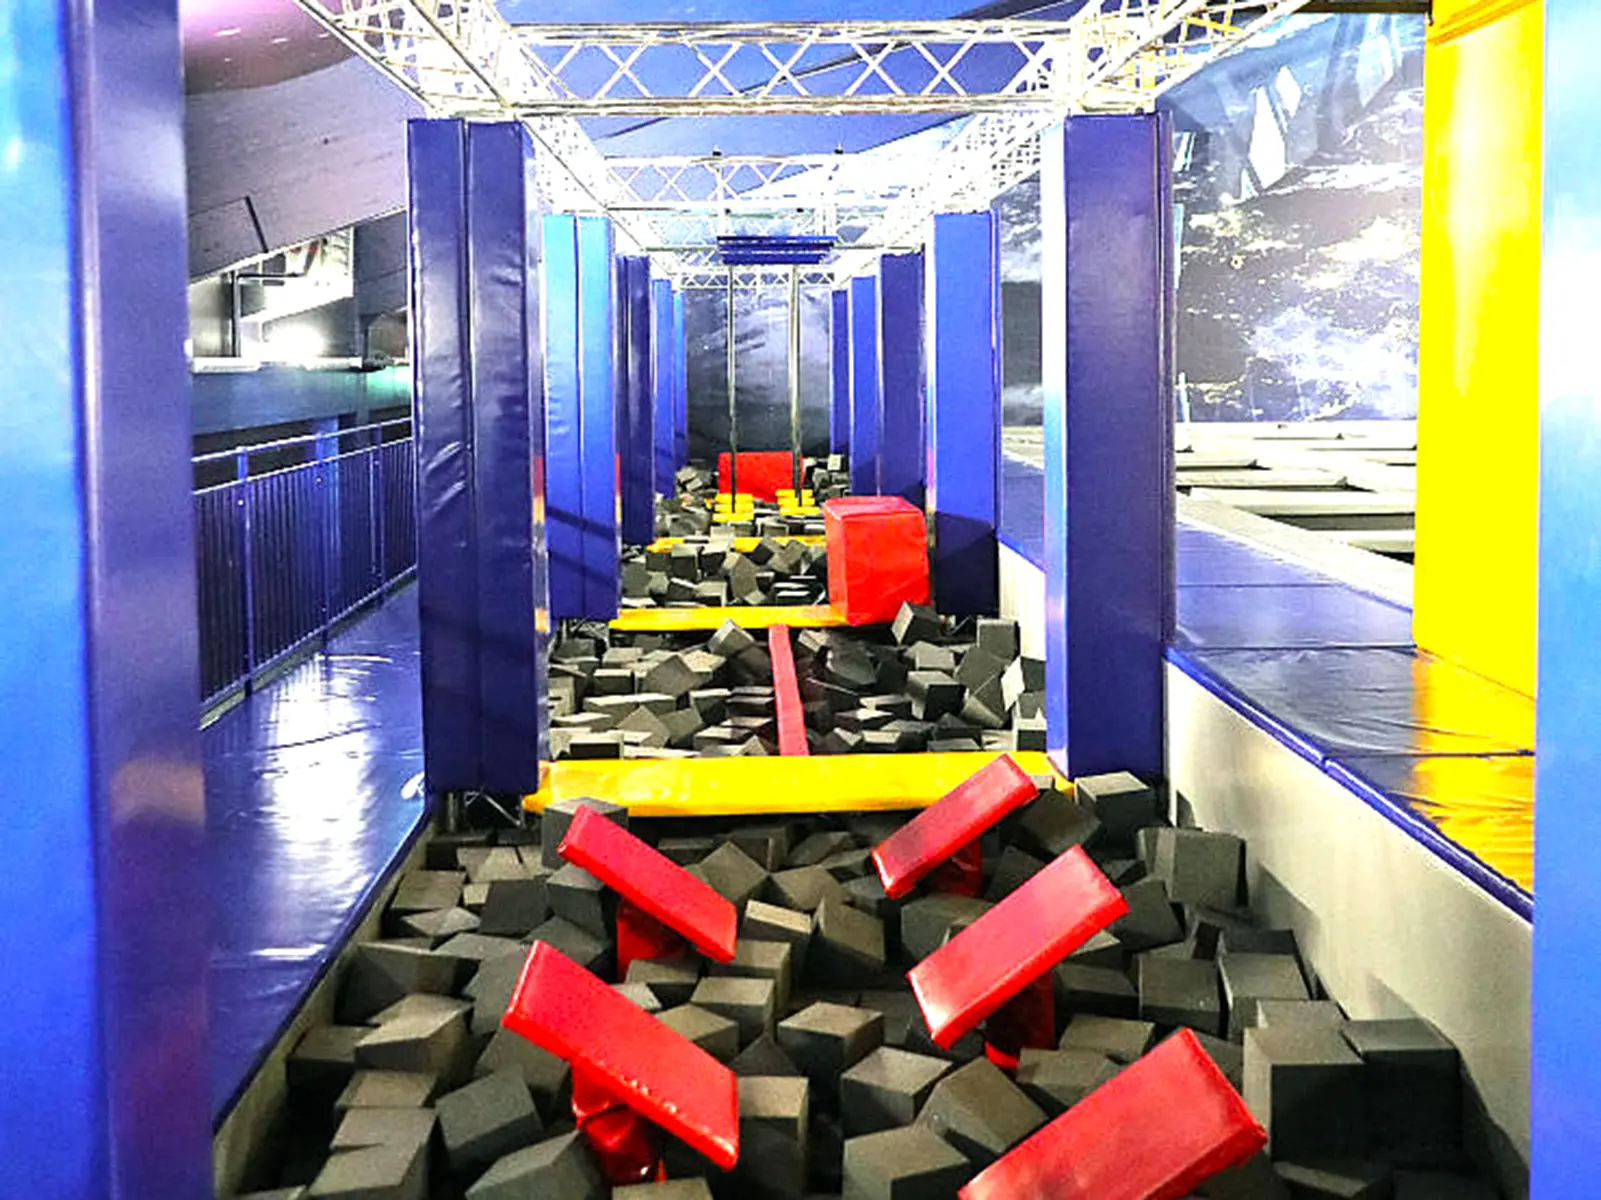 Ninja wipeout course equipment for kids in Germany